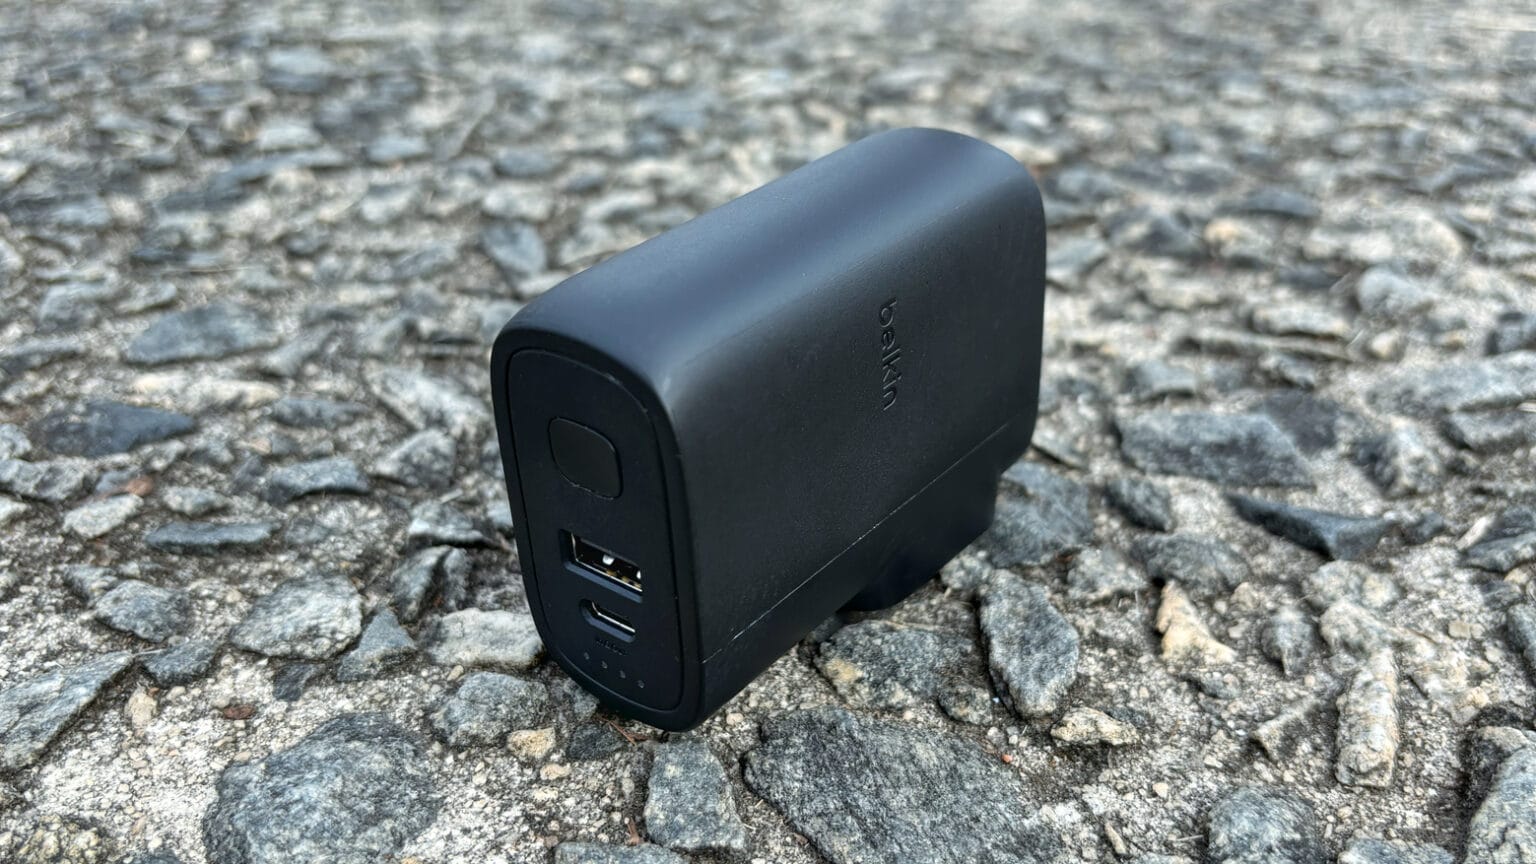 Belkin BoostCharge Hybrid Wall Charger 25W + Power Bank 5K review